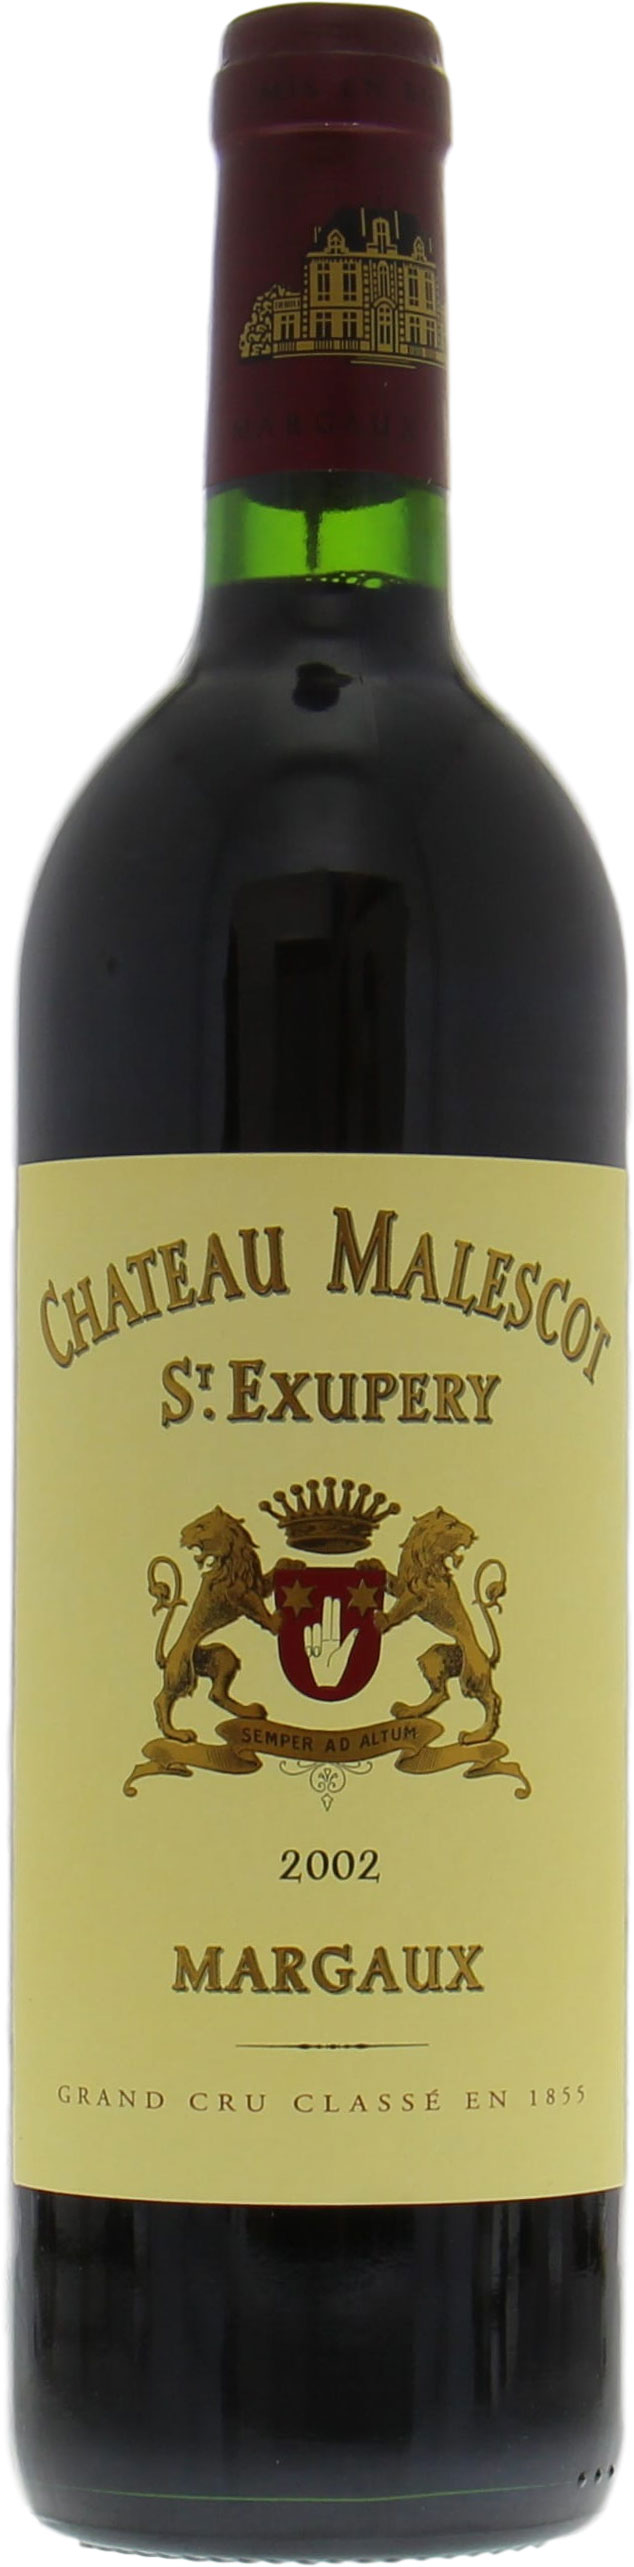 Chateau Malescot-St-Exupery - Chateau Malescot-St-Exupery 2002 perfect